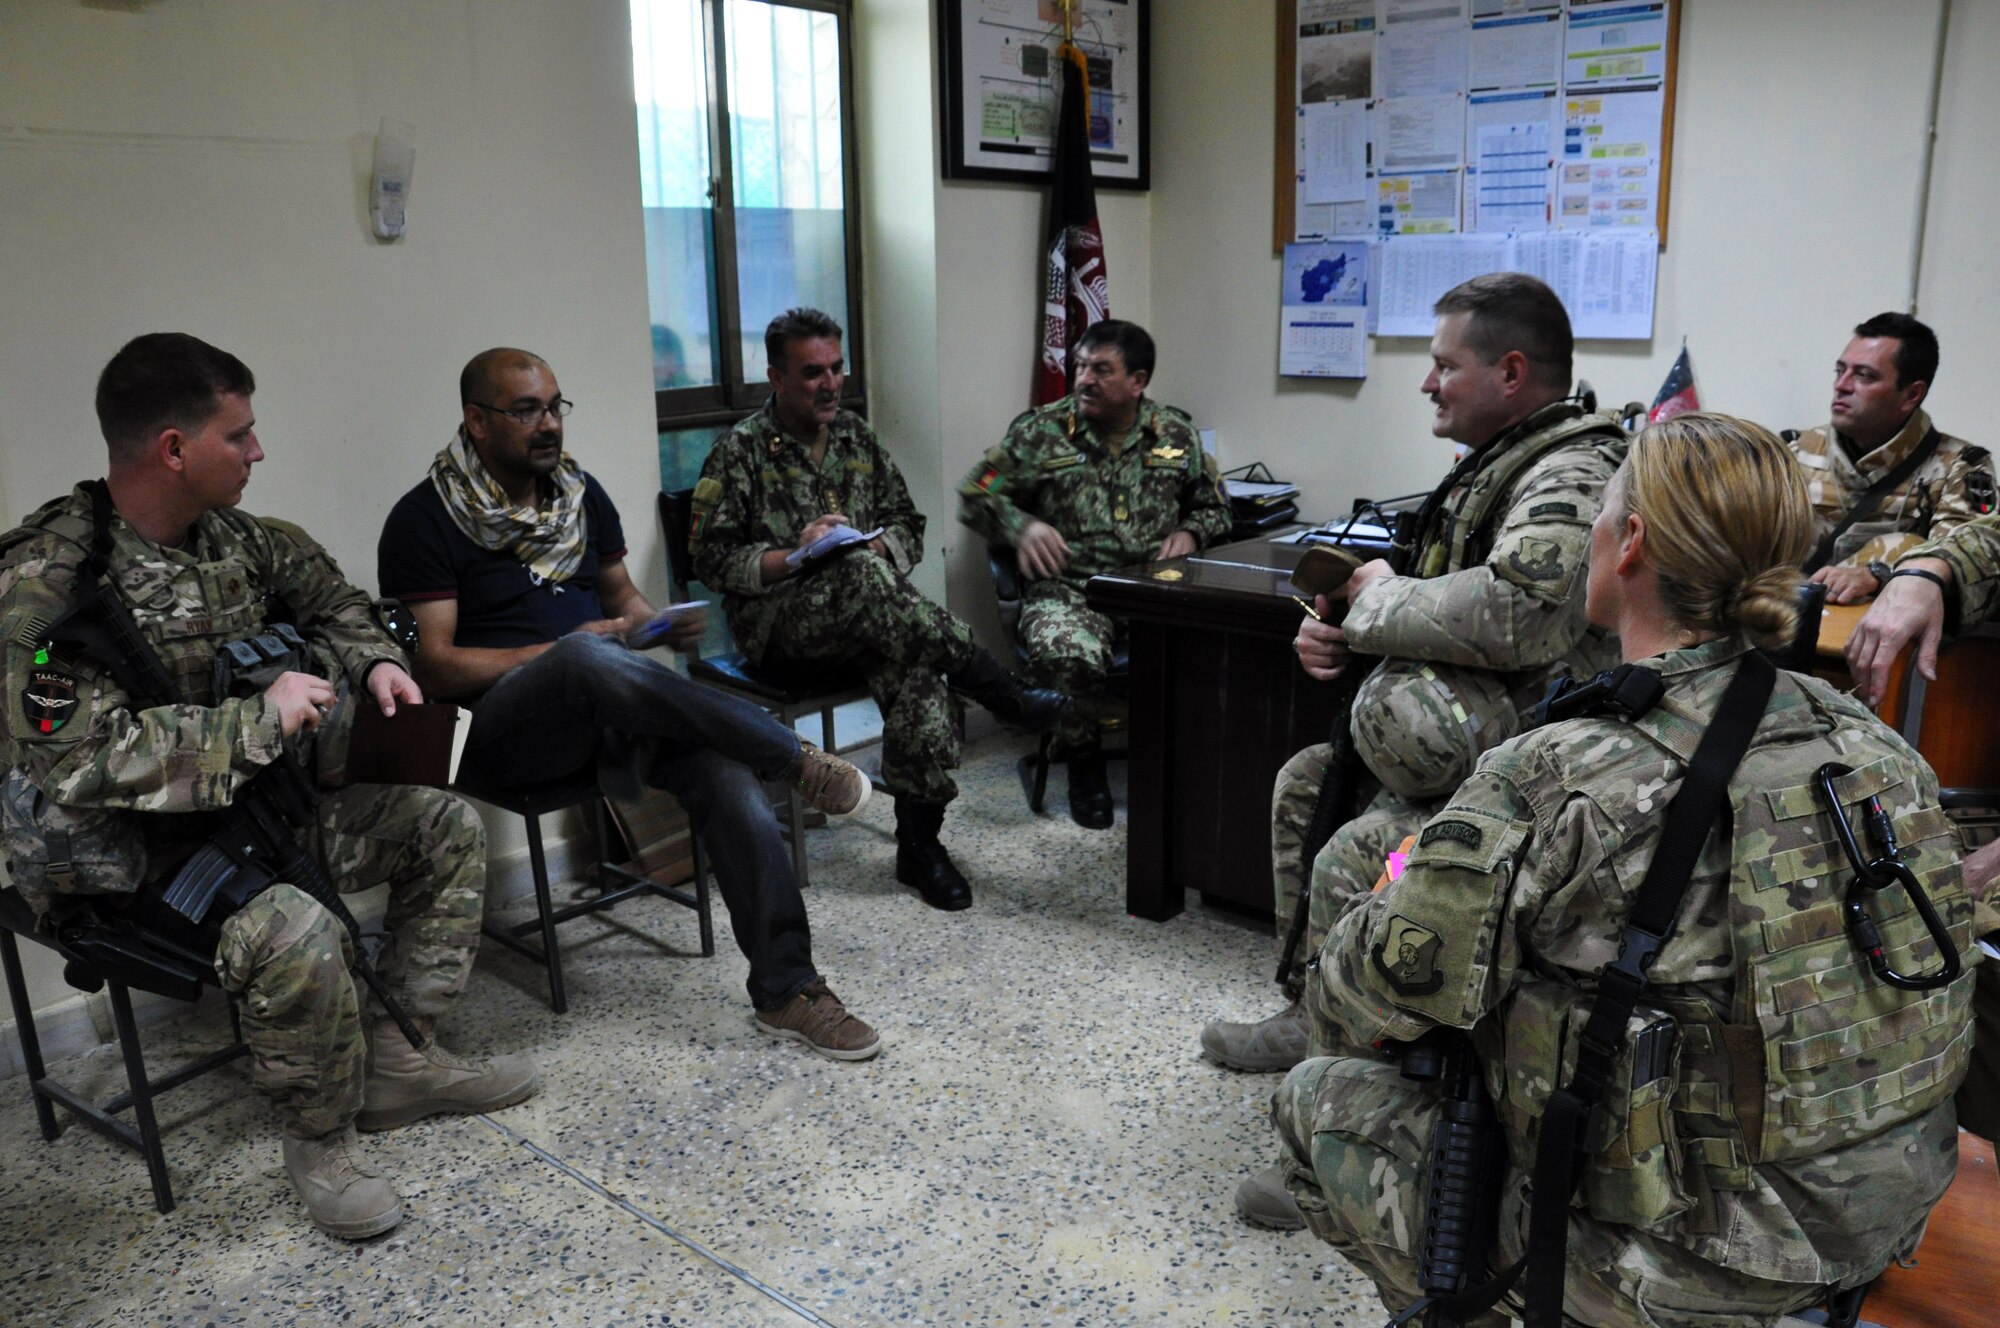 Train, Advice, Assist Command – Air (TAAC-Air) Coalition advisors meet with Afghan Air Force wing operations center and Afghan command and control Center leaders Aug. 31, 2015.  This was the first Afghan-led exercise scenario coordinated and planned between the Kabul WOC and ACCC. The advisors were on-hand to ensure the AAF were on-track to achieve their goals, which were to test their communication flow between their two agencies and their ability to task and launch recovery “exercise” aircraft for a “downed” aircraft. (U.S. Air Force photo by Capt. Eydie Sakura/released)